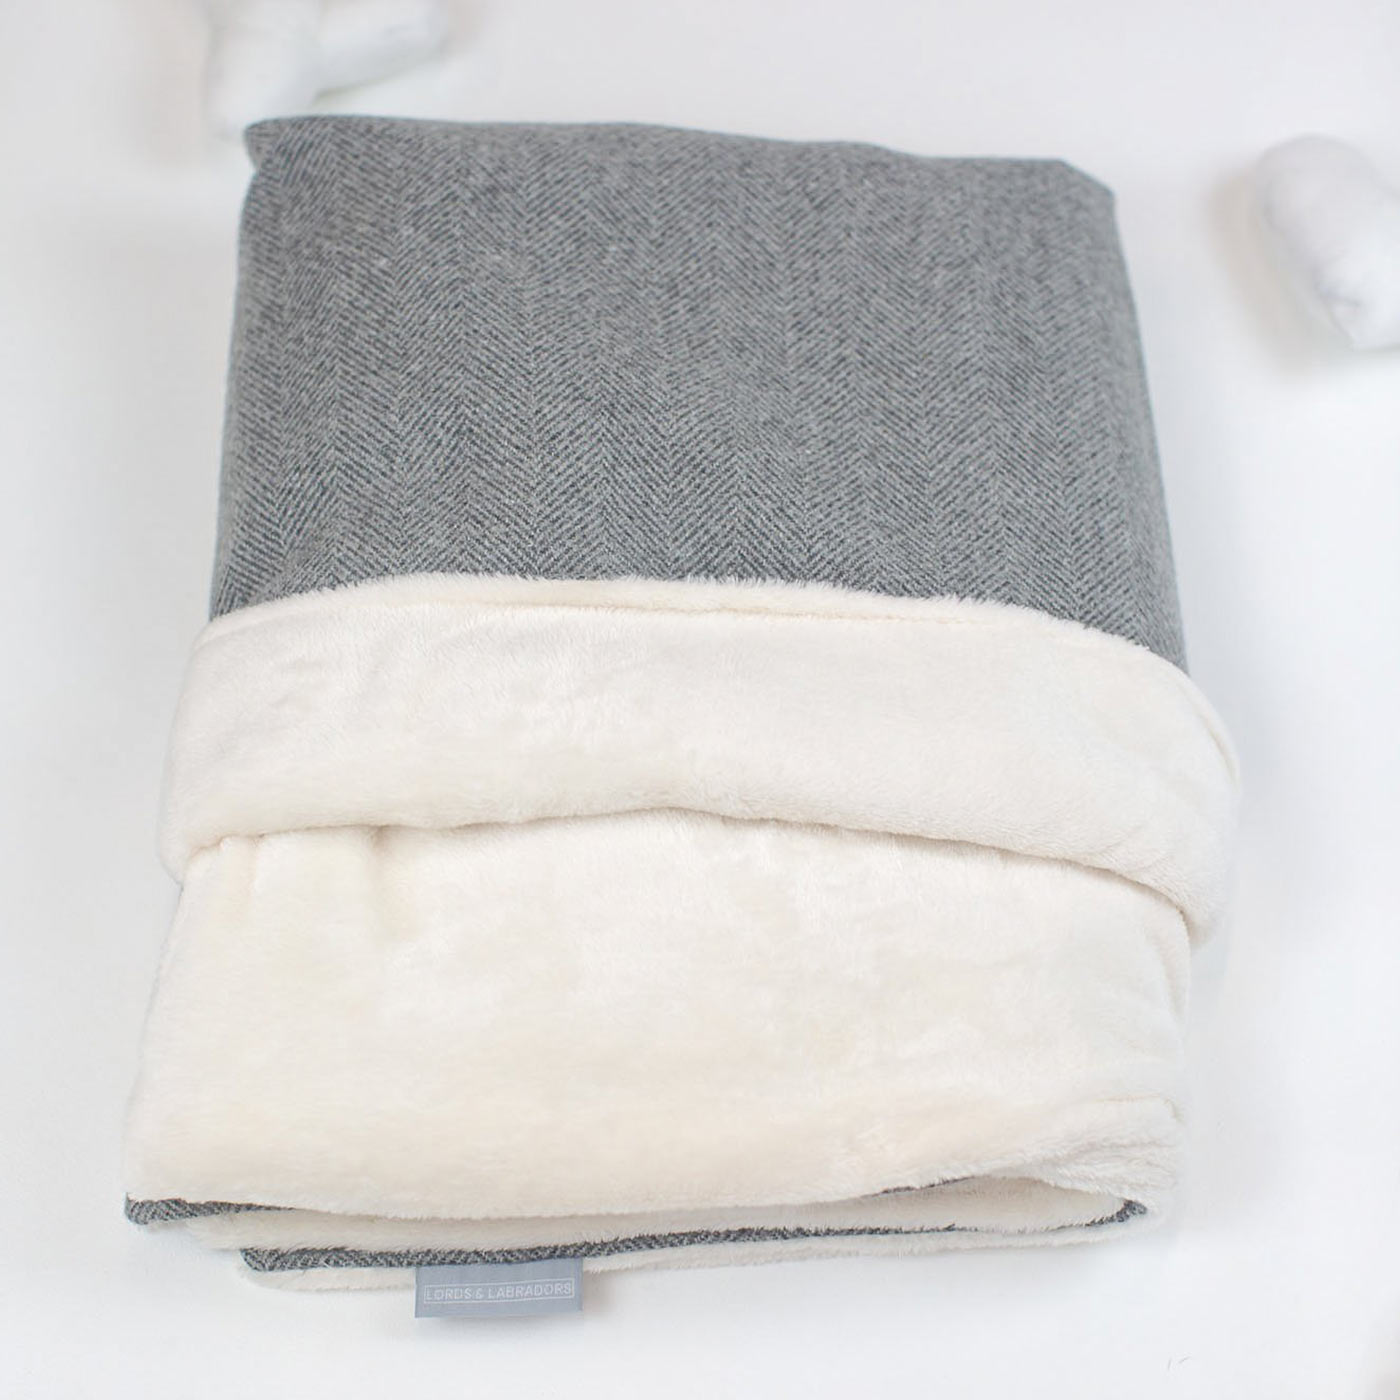 [color:pewter herringbone] Super Soft Sherpa & Teddy Fleece Lining, Our Luxury Cat & Kitten Blanket In Stunning Pewter Herringbone Tweed The Perfect Cat Bed Accessory! Available To Personalize at Lords & Labradors US